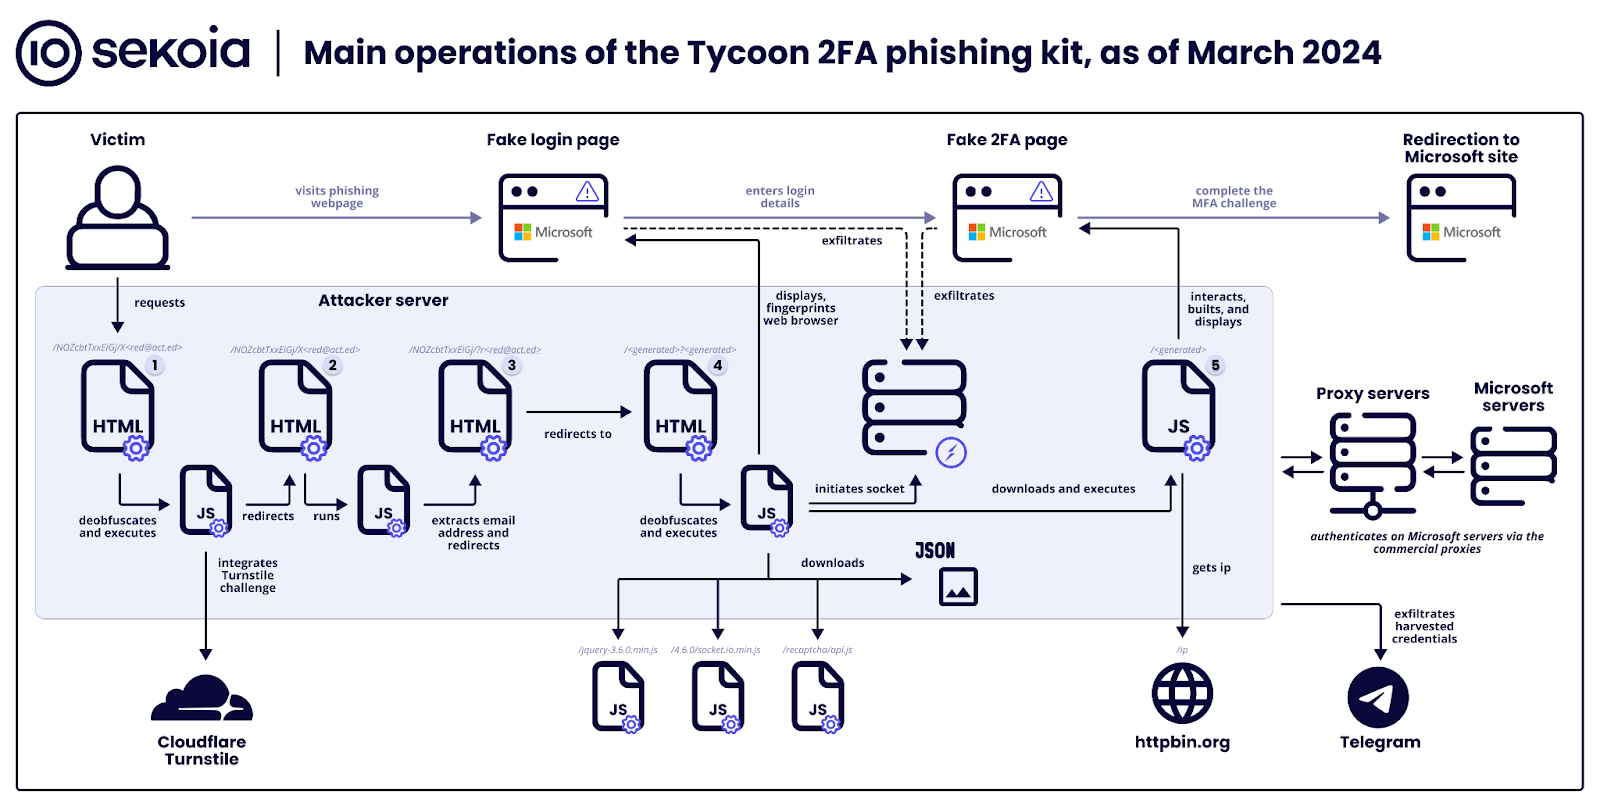 Overview-of-the-main-operations-specific-to-the-Tycoon-2FA-phishing-kit_as-of-March-2024